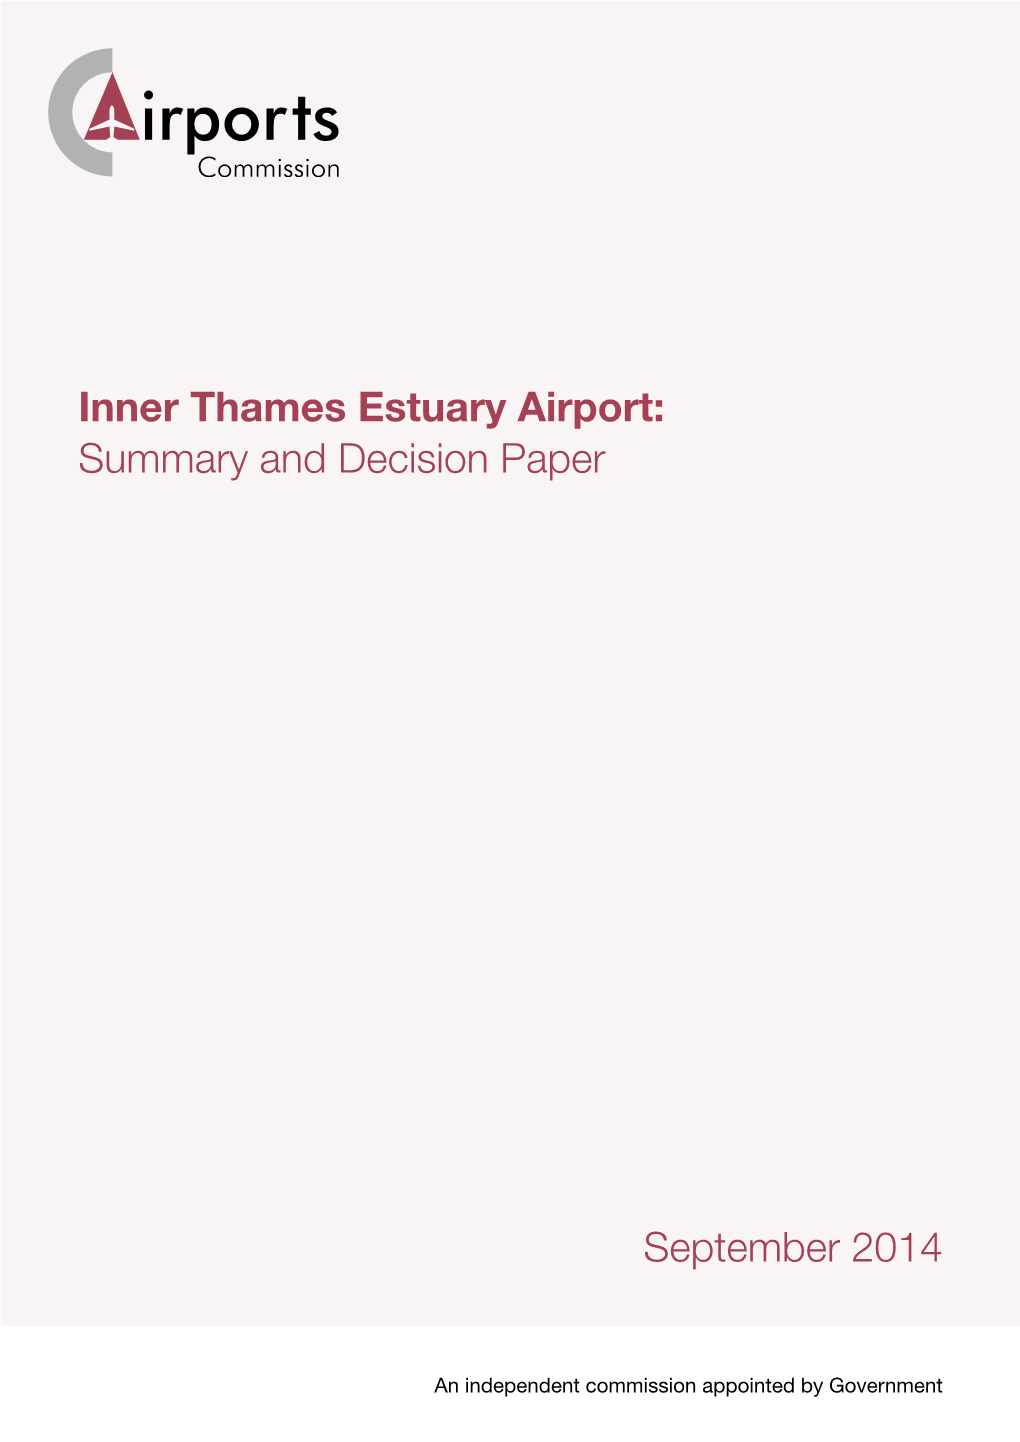 Inner Thames Estuary Airport: Summary and Decision Paper